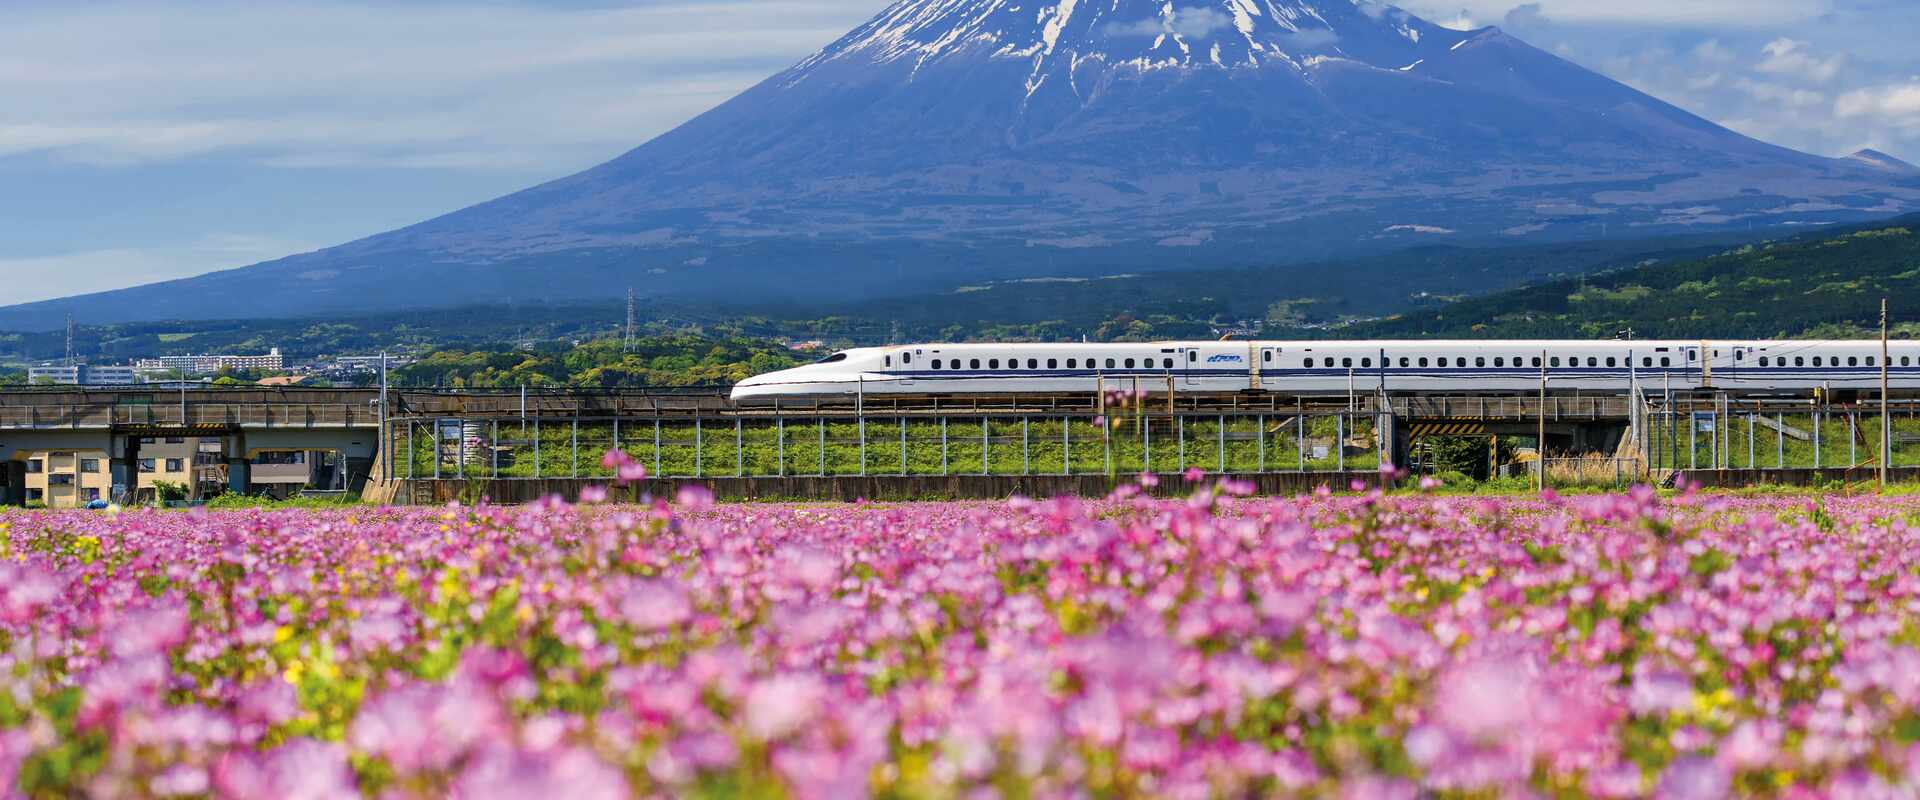 Bullet train travels past fields in Japan with Mt Fuji in the background